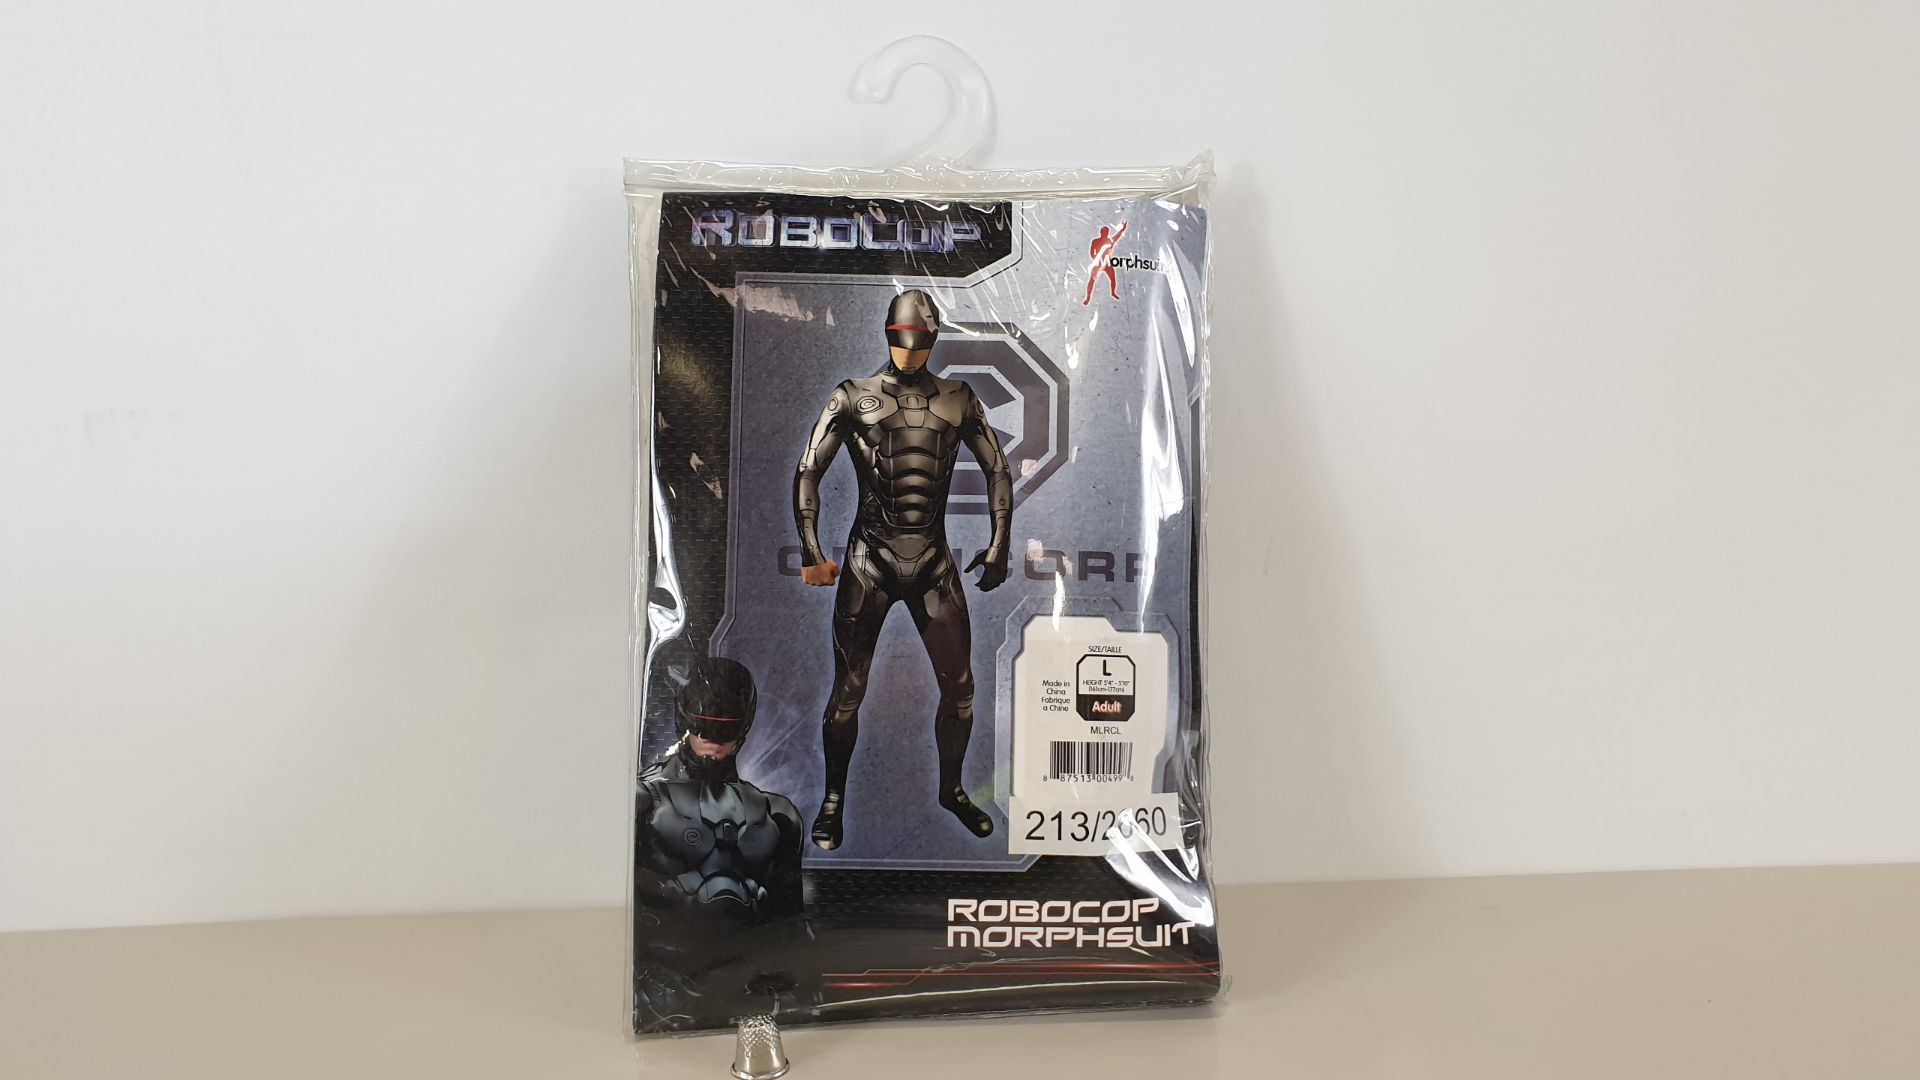 10 X ROBOCOP MORPHSUITS - SIZE LARGE - (BRAND NEW IN HANGER PACKS)